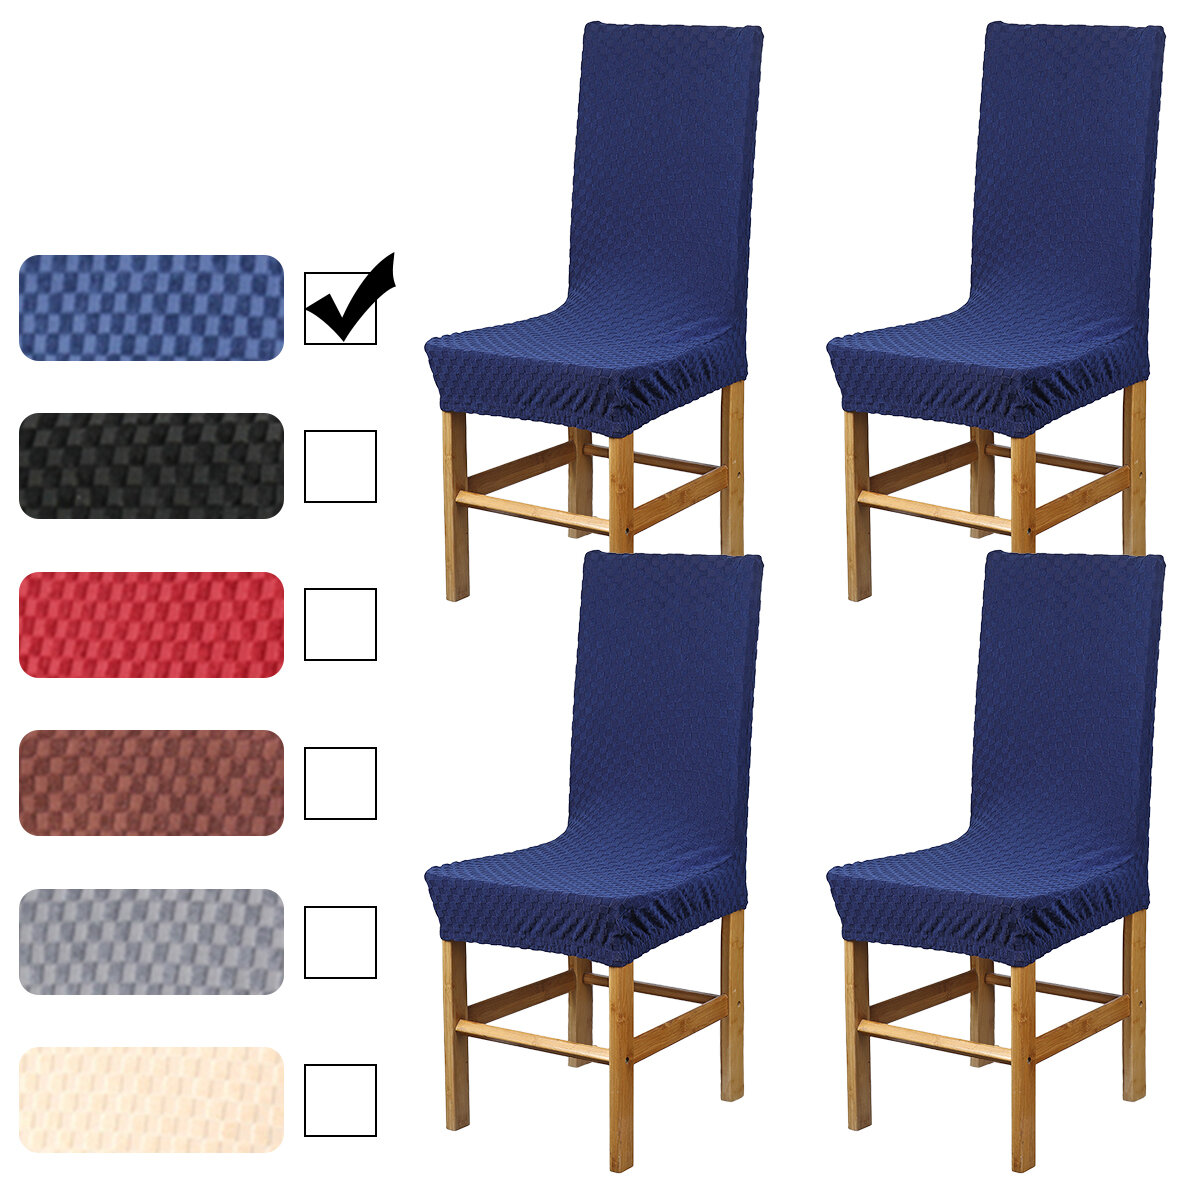 [4 Pack Chair Covers] CAVEEN Spandex Stretch Chair Slipcover Removable & Washable Protector Cover for Dining Room Seat C